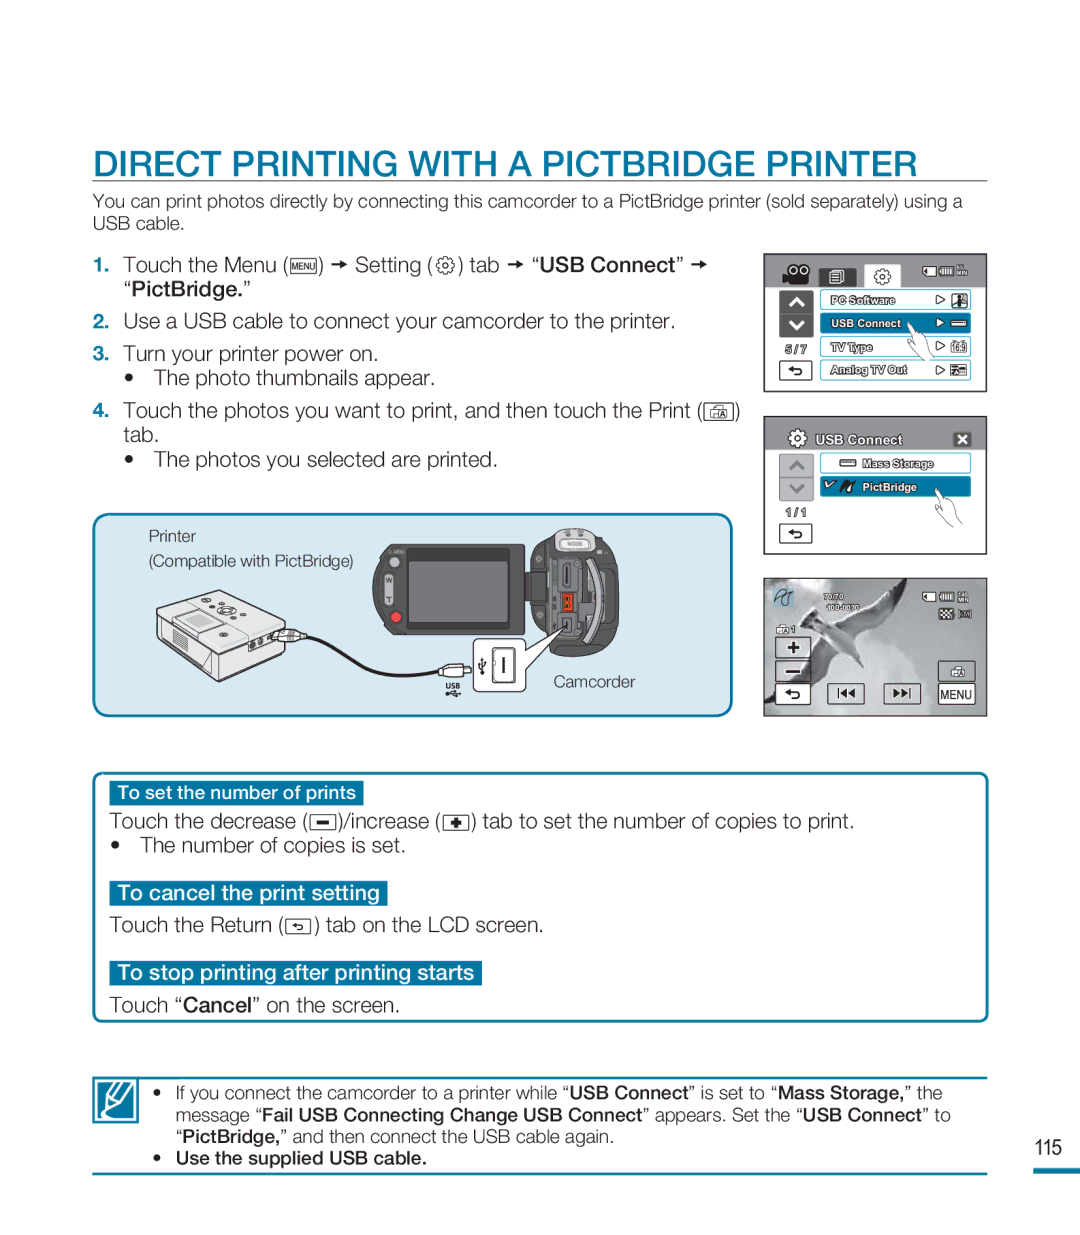 Samsung HMX-M20BN Direct Printing with a Pictbridge Printer, To cancel the print setting, Touch Cancel on the screen 